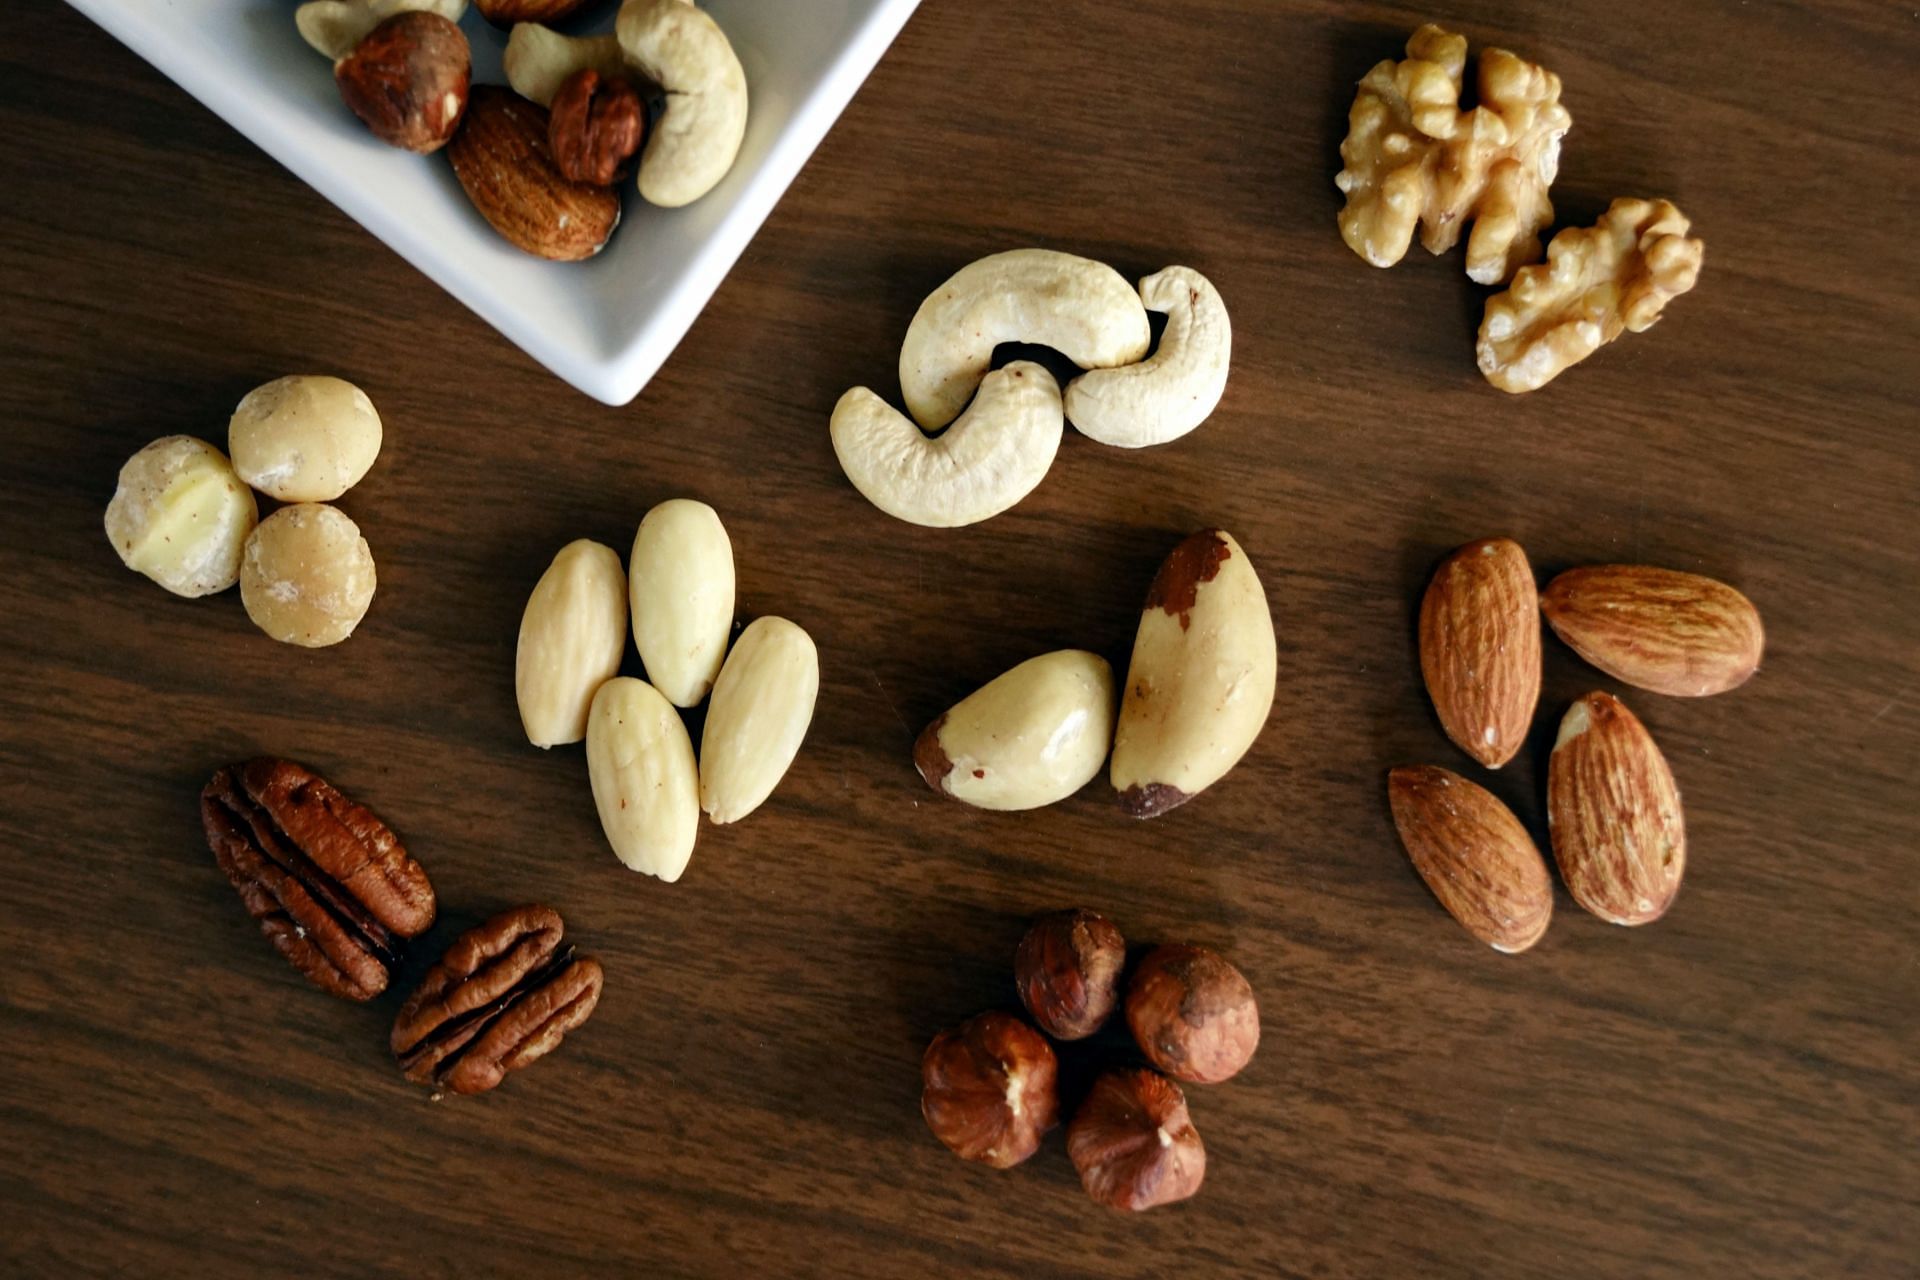 Nuts and seeds are anti inflammatory and anti-oxidant. (Image via Pexels / Marta Branco)